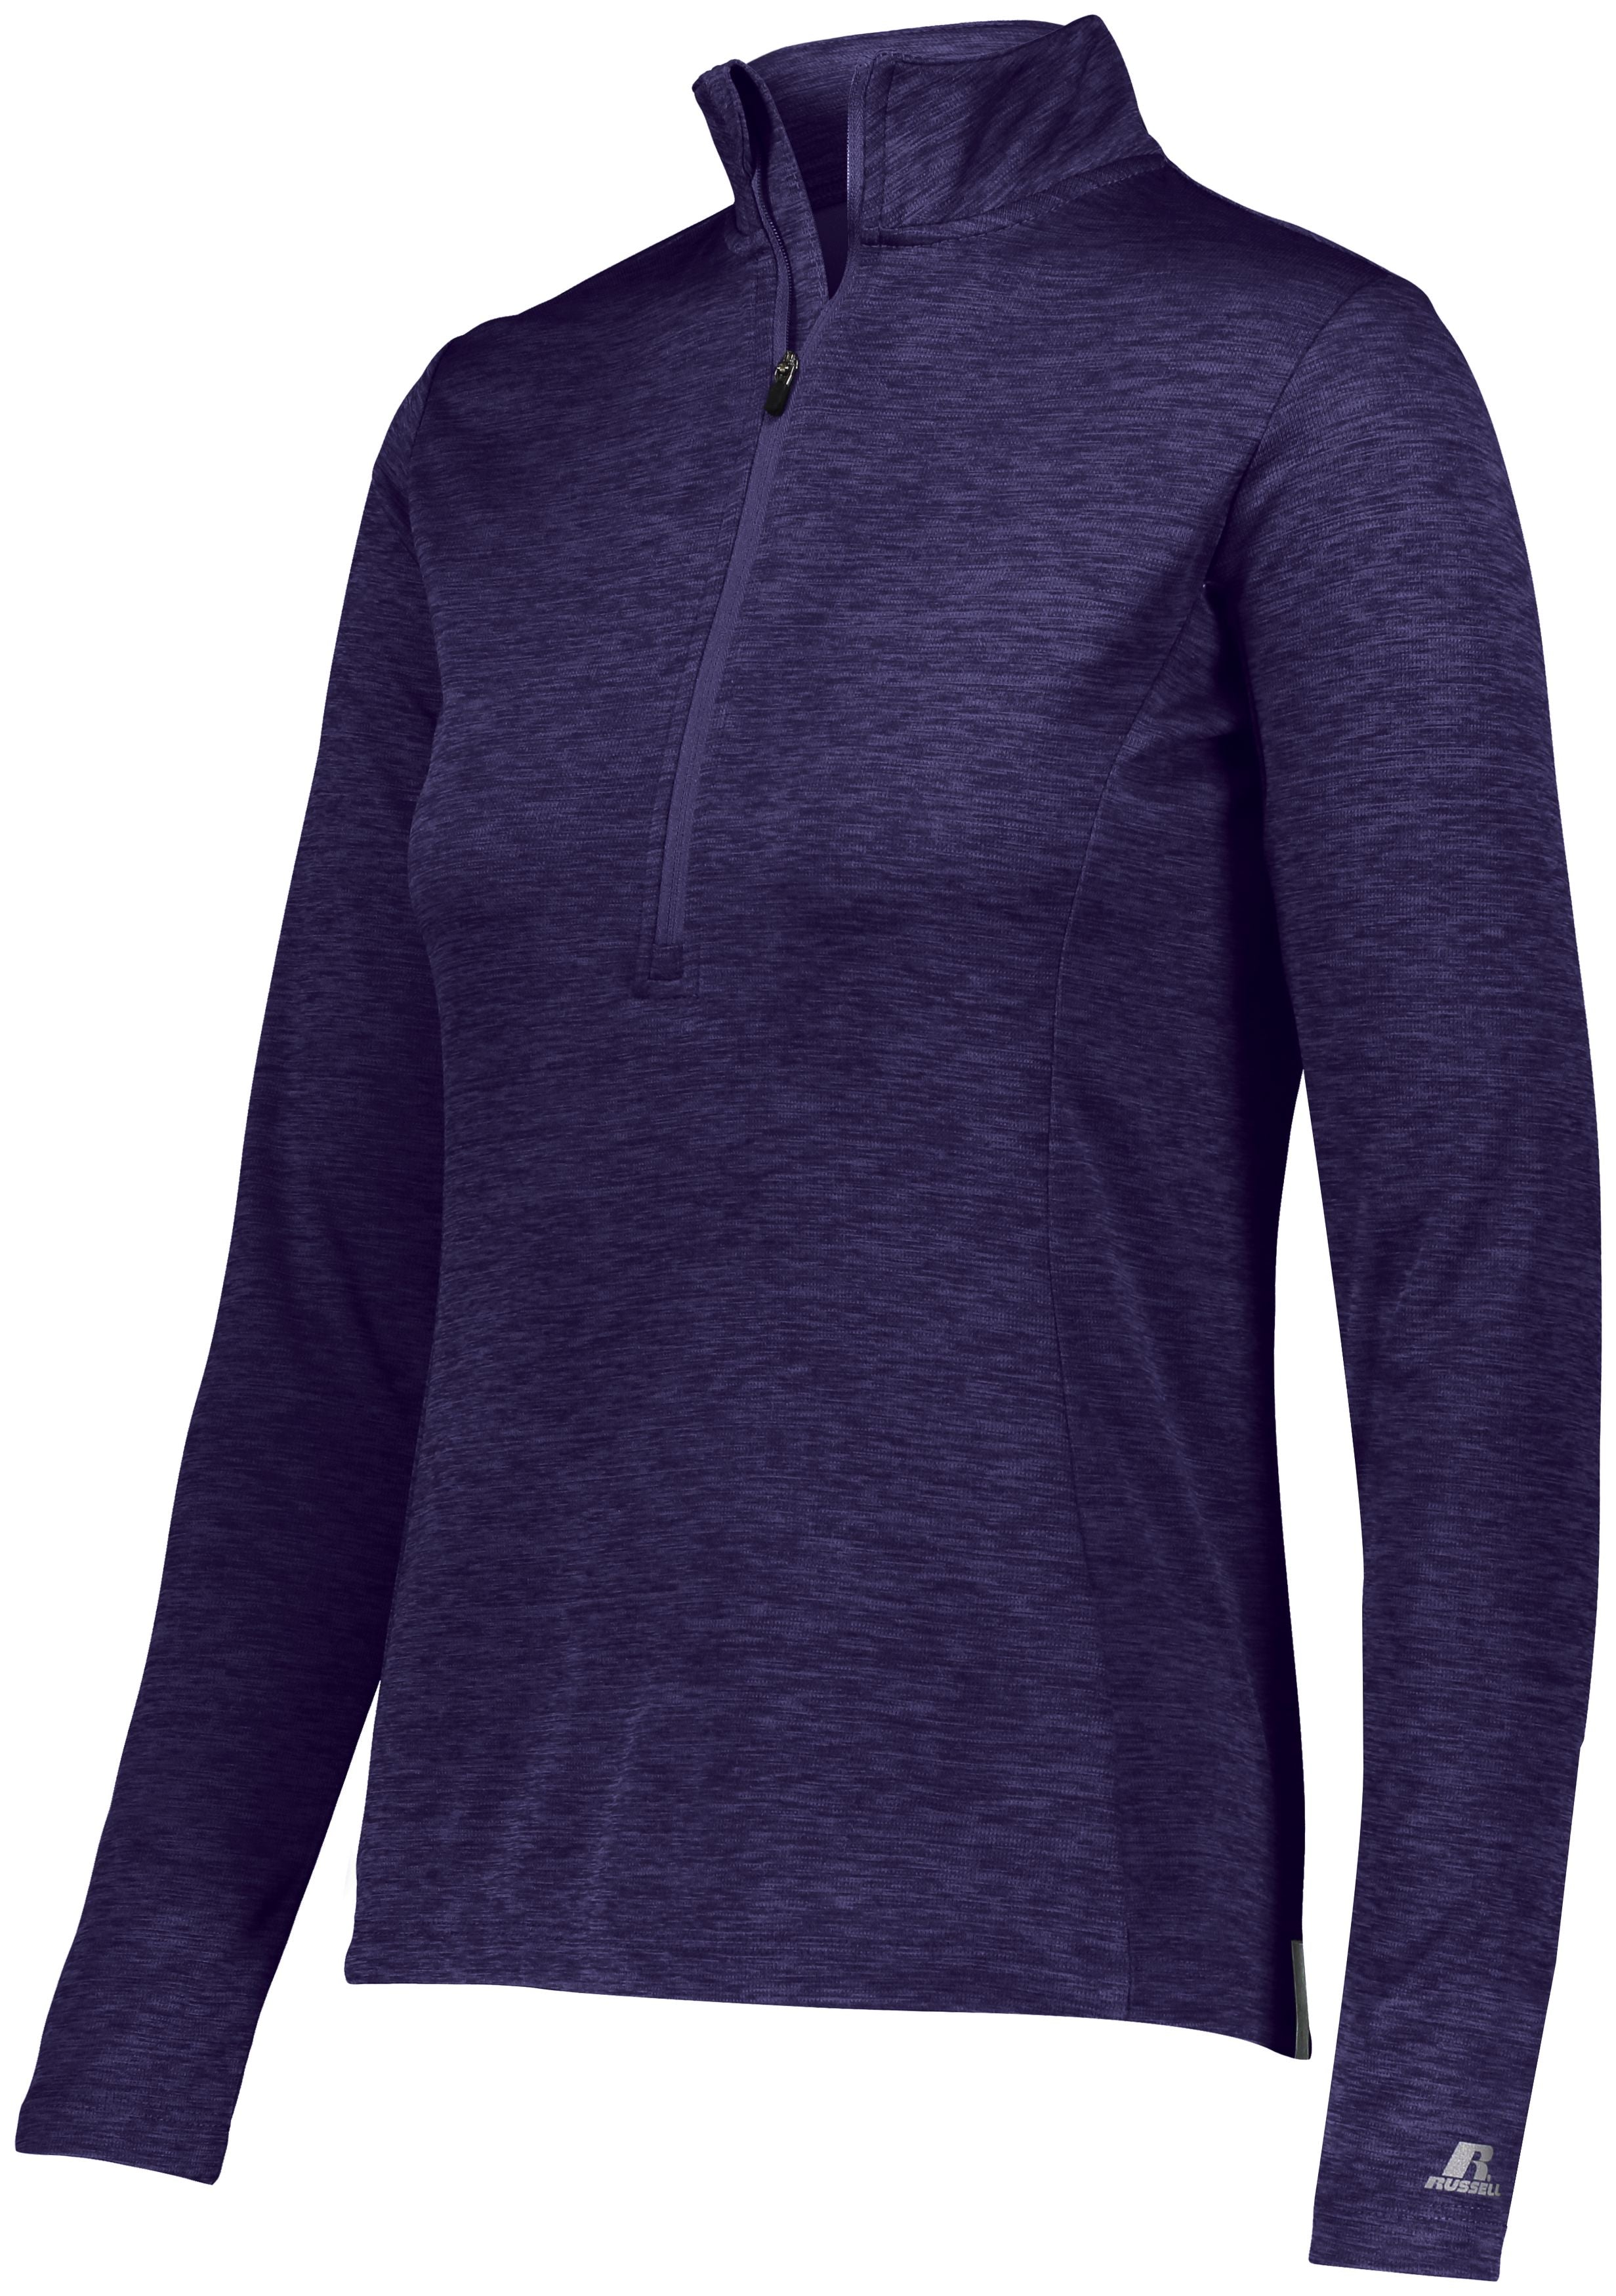 Russell Athletic Ladies Dri-Power Lightweight 1/4 Zip Pullover in Purple  -Part of the Ladies, Russell-Athletic-Products, Shirts product lines at KanaleyCreations.com